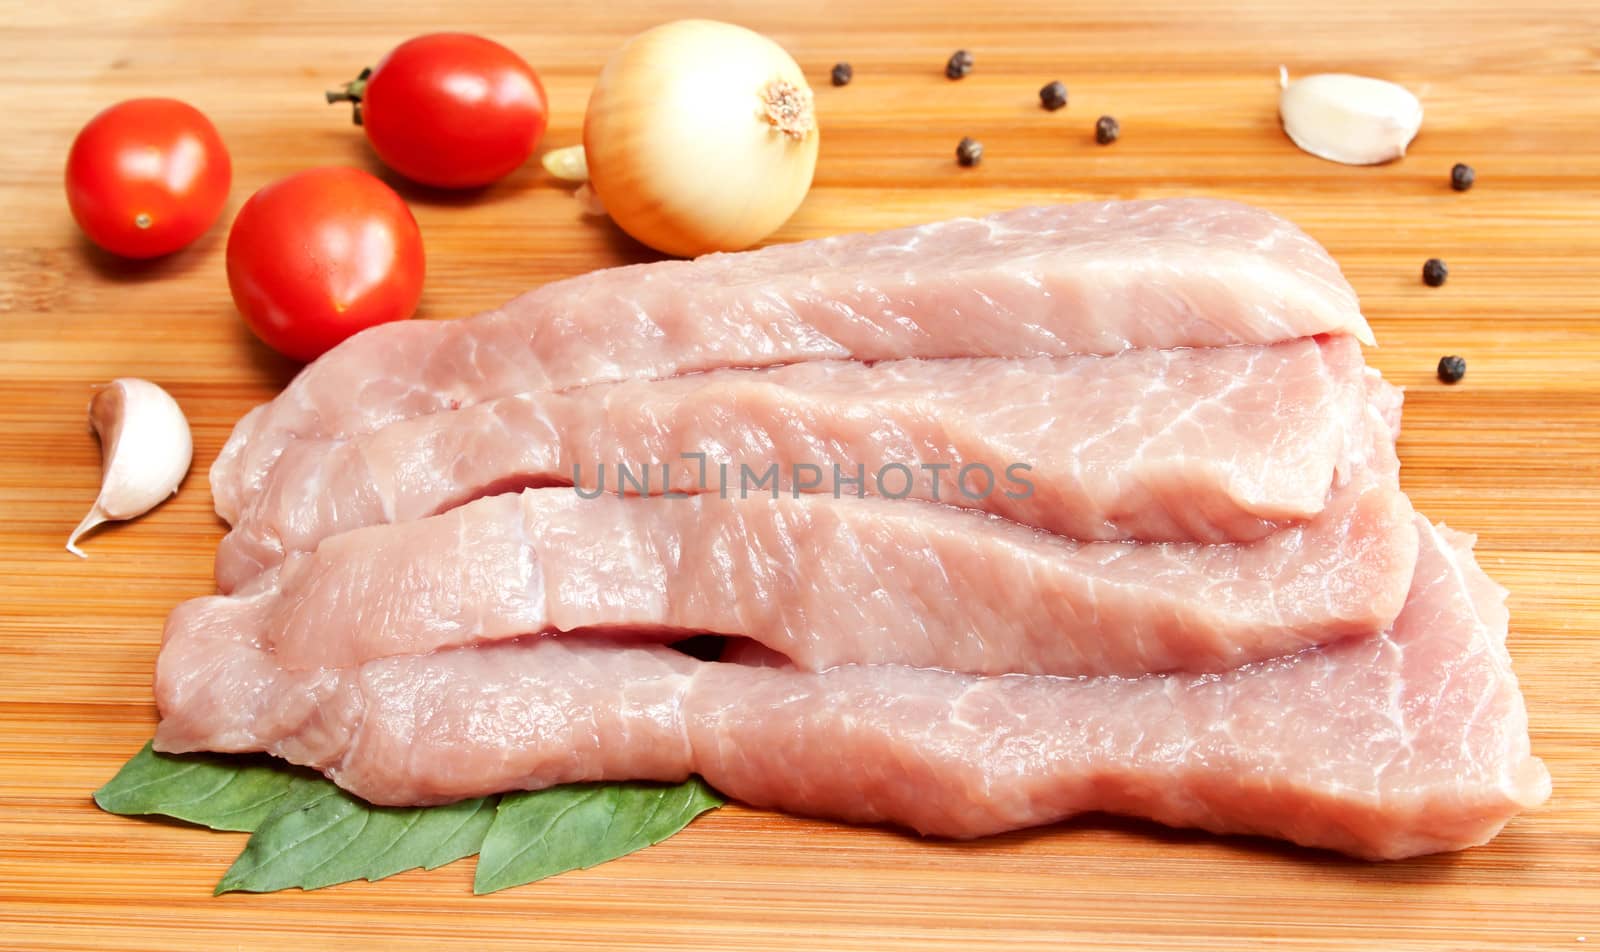 Raw pork with spices and vegetables
